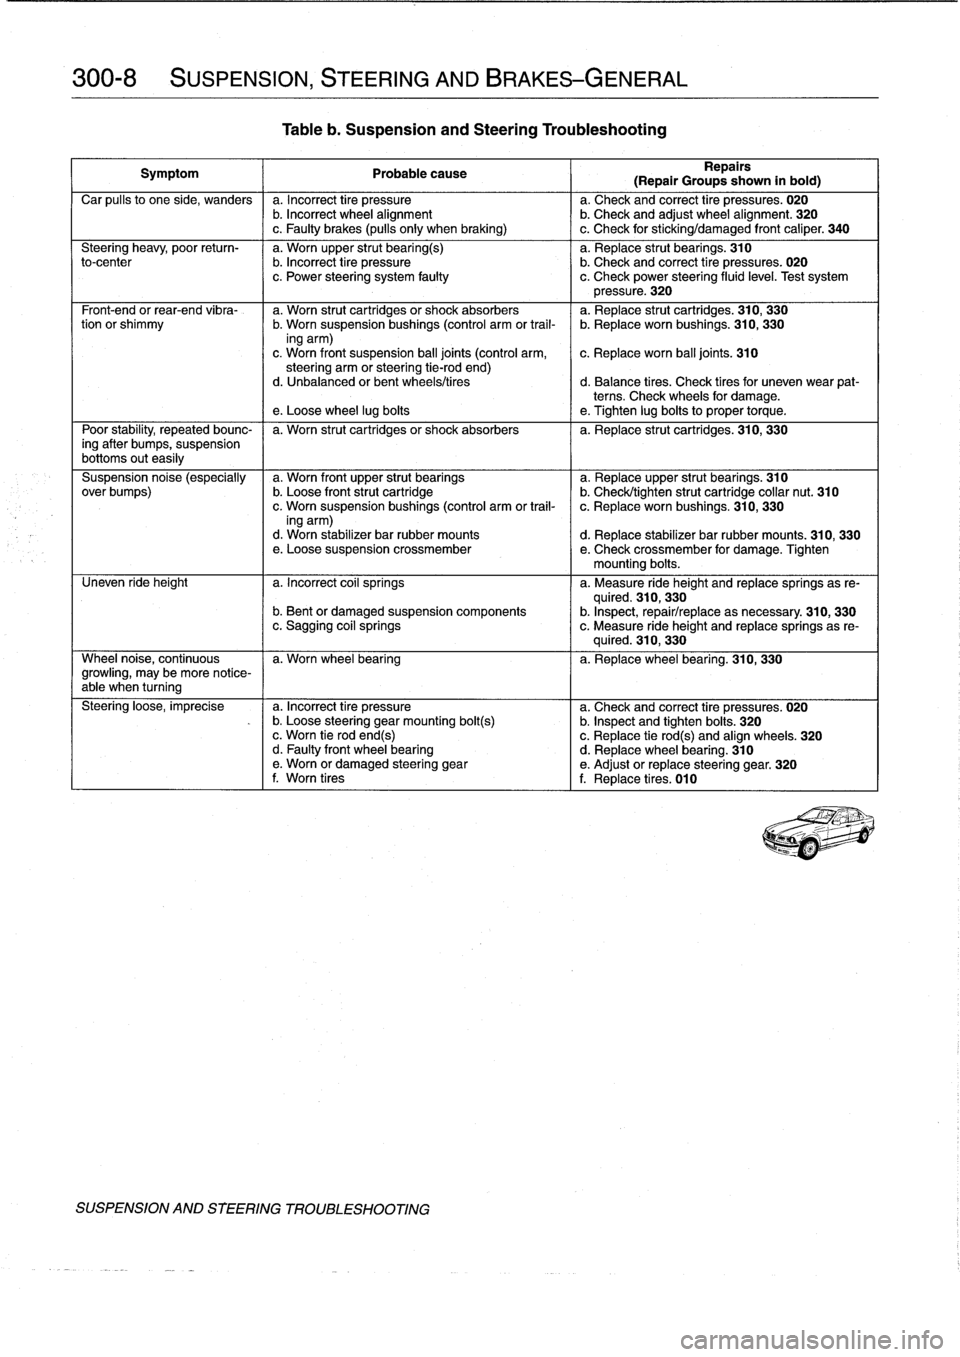 BMW 325i 1998 E36 Workshop Manual 
300-8

	

SUSPENSION,
STEERING
AND
BRAKES-GENERAL

Tableb
.
Suspension
and
Steering
Troubleshooting

Symptom

	

1

	

Probable
cause
Repairs
(Repair
Groups
shown
in
bold)

Car
pulís
to
one
side,
wa